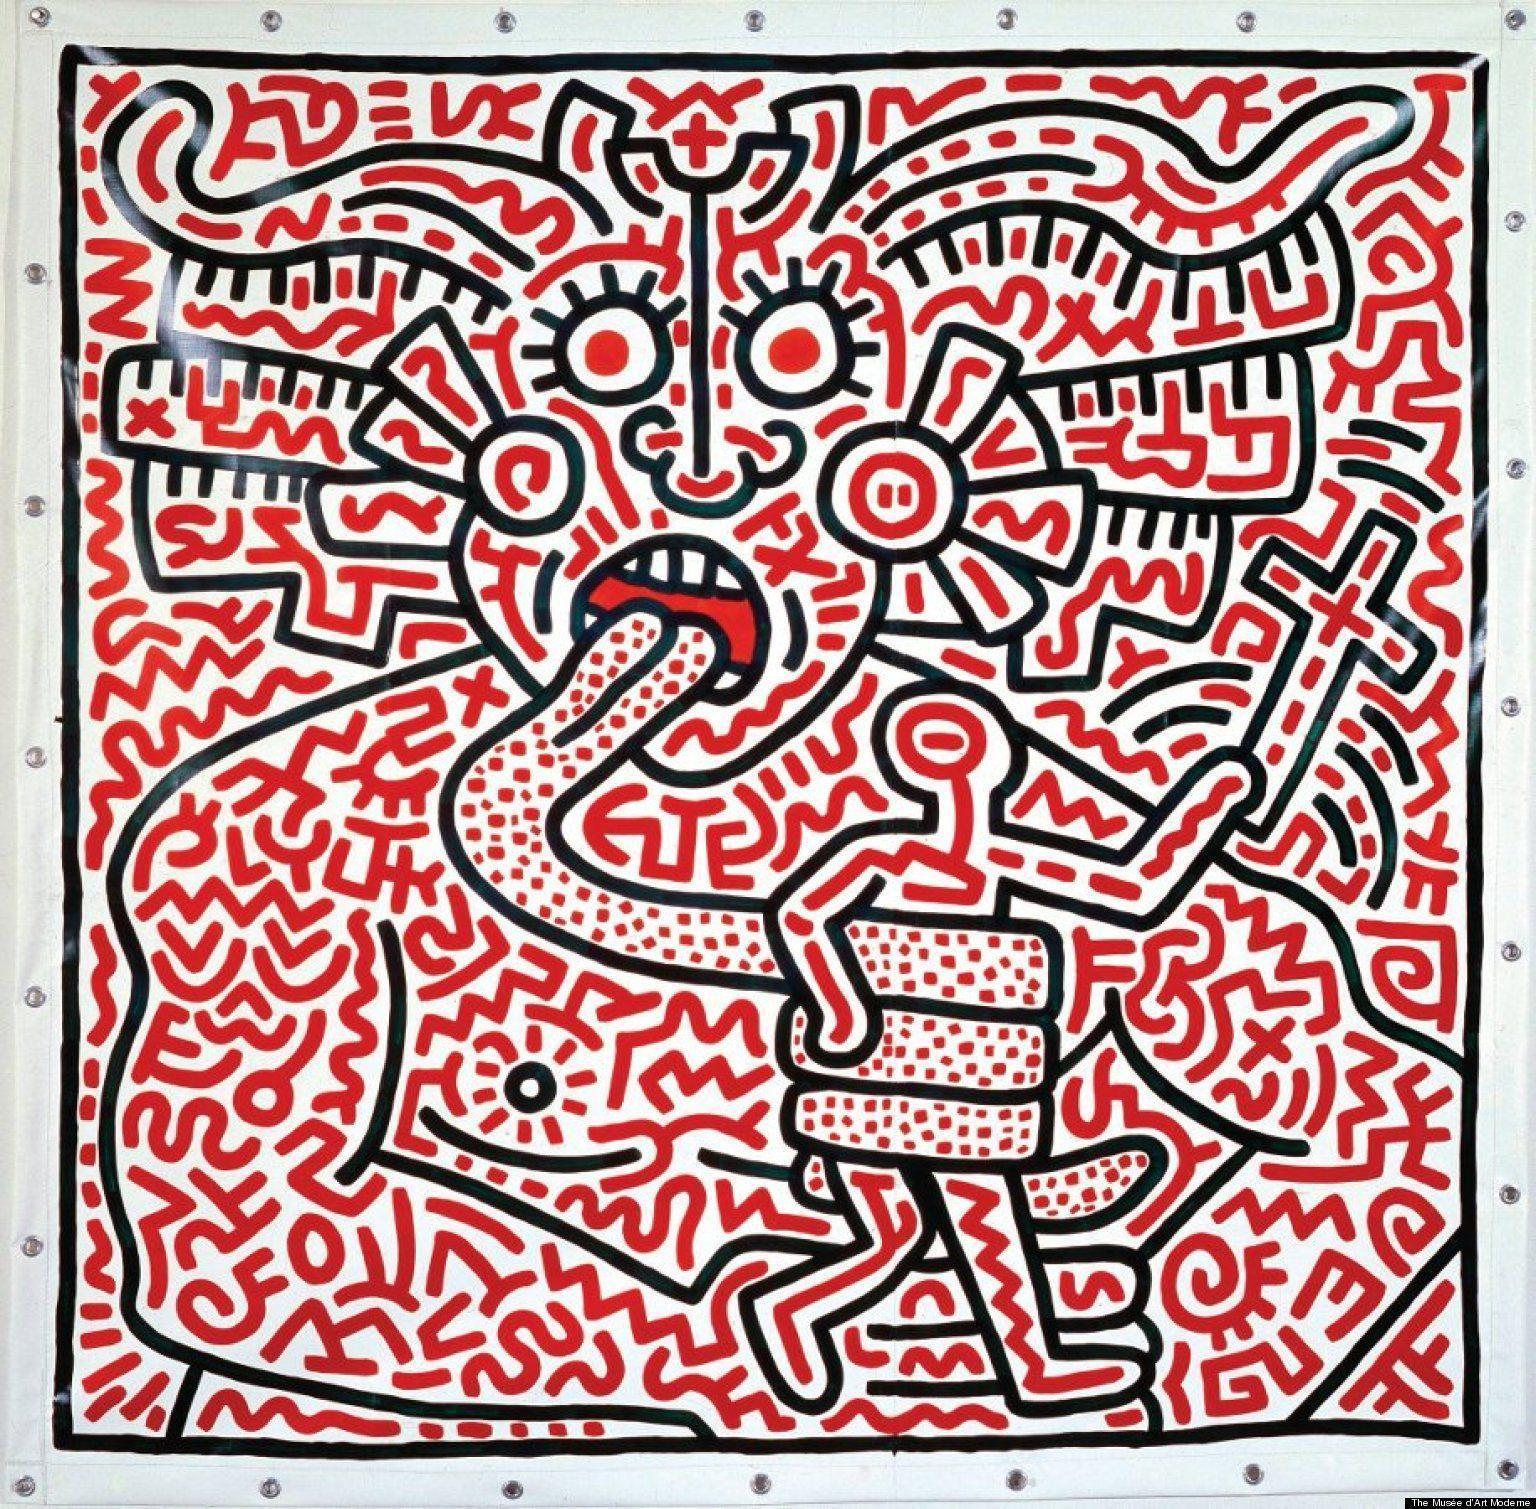 Keith Haring 'Political Line' At Musée D'Art Moderne Debuts In